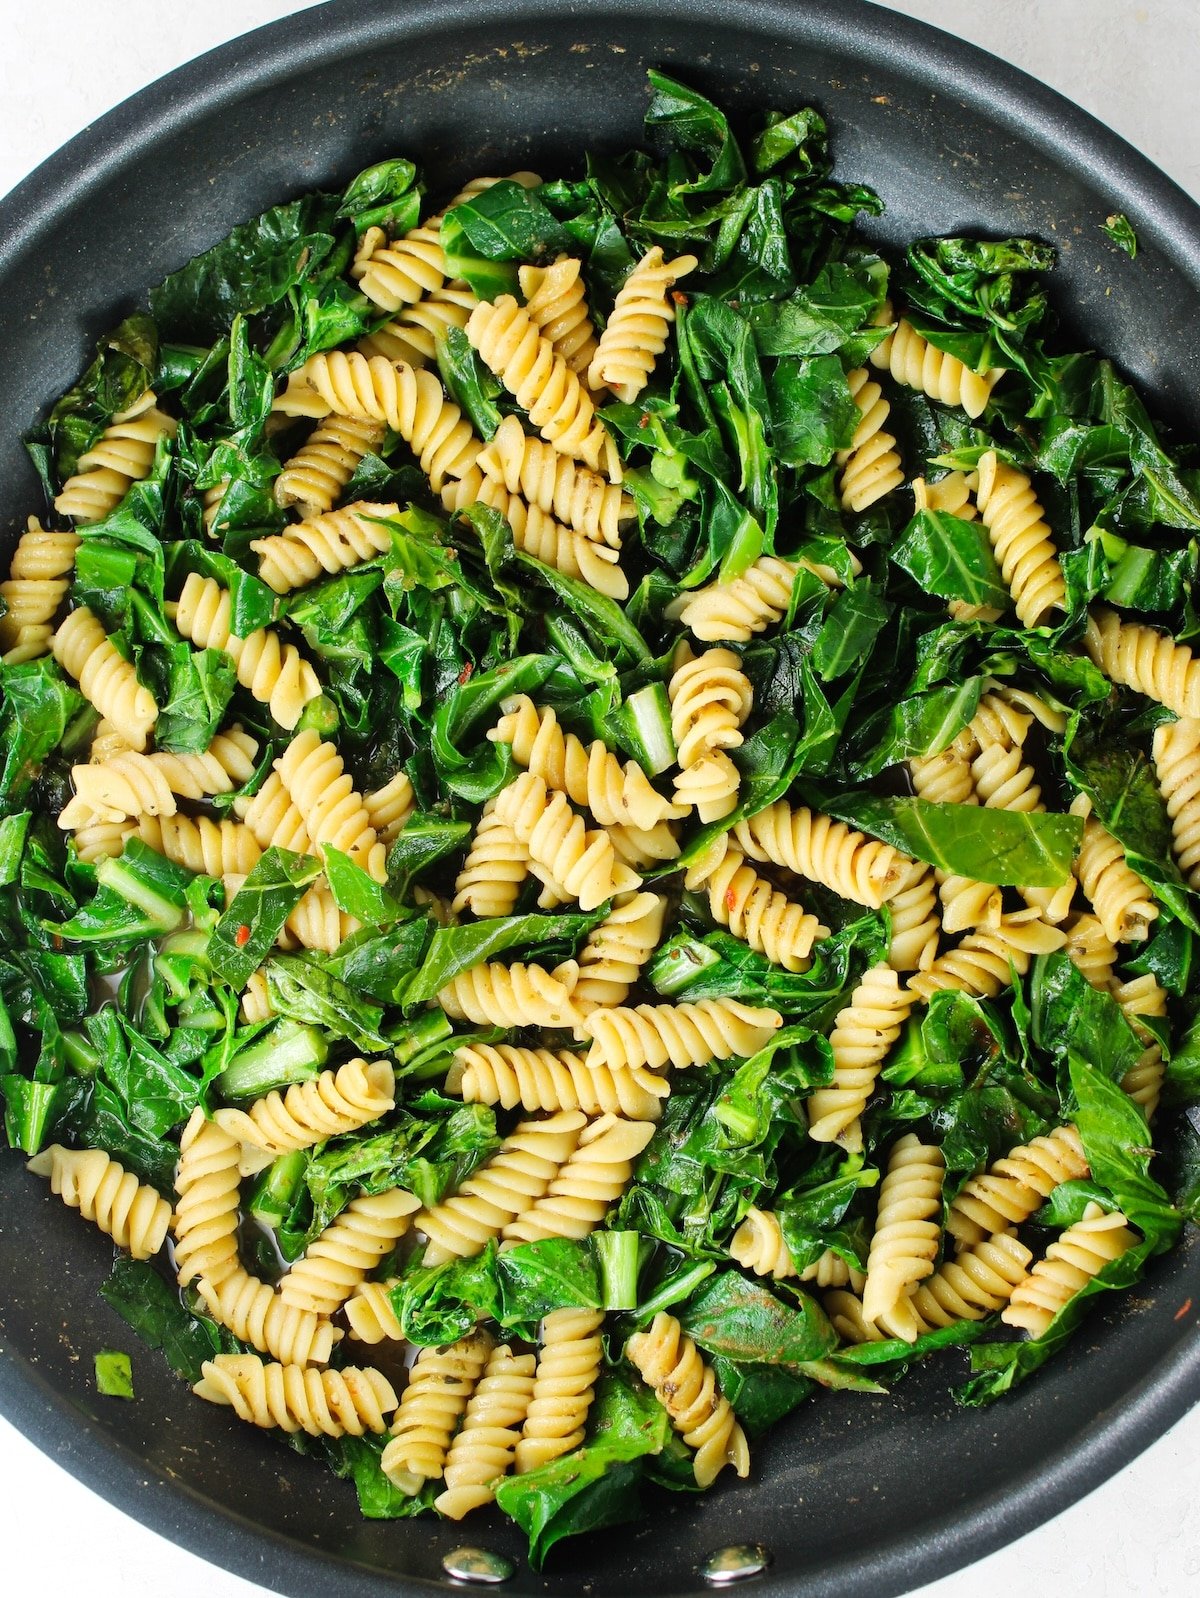 Herbs, seasoning, pasta and greens cooking in a pan.